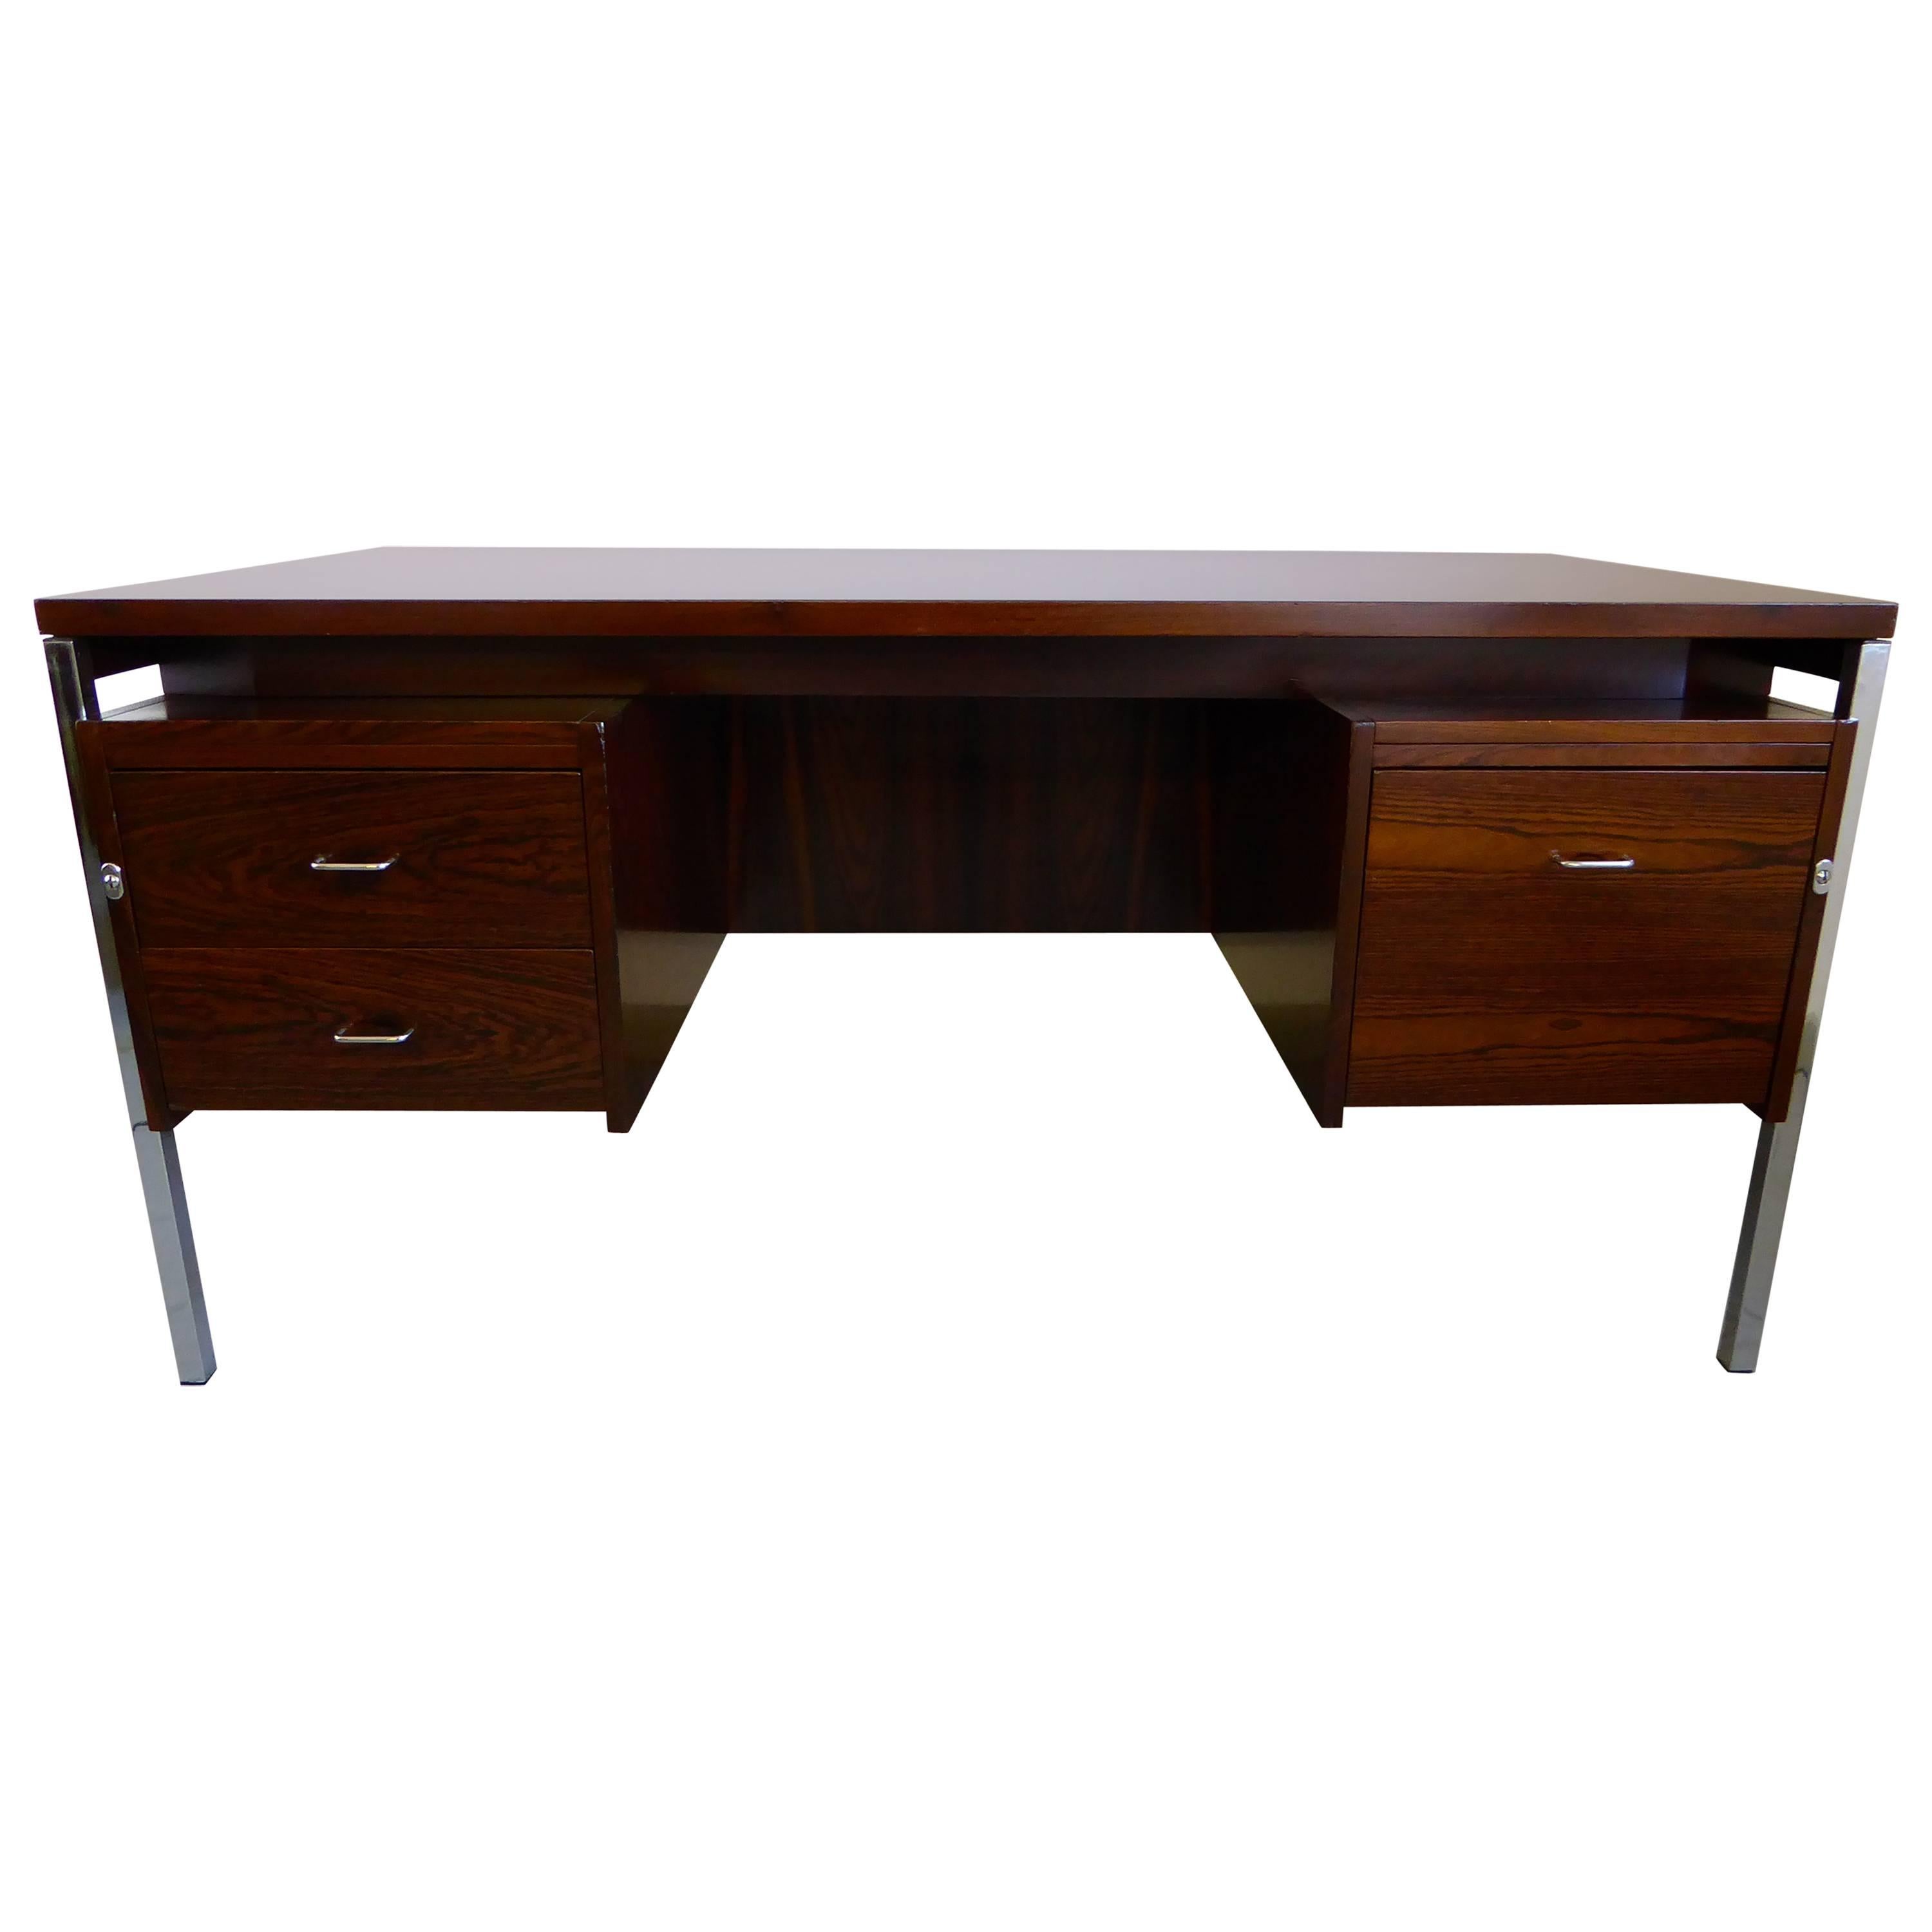 Rare Brazilian Rosewood and Steel Desk by Moveis Cimo, 1960s